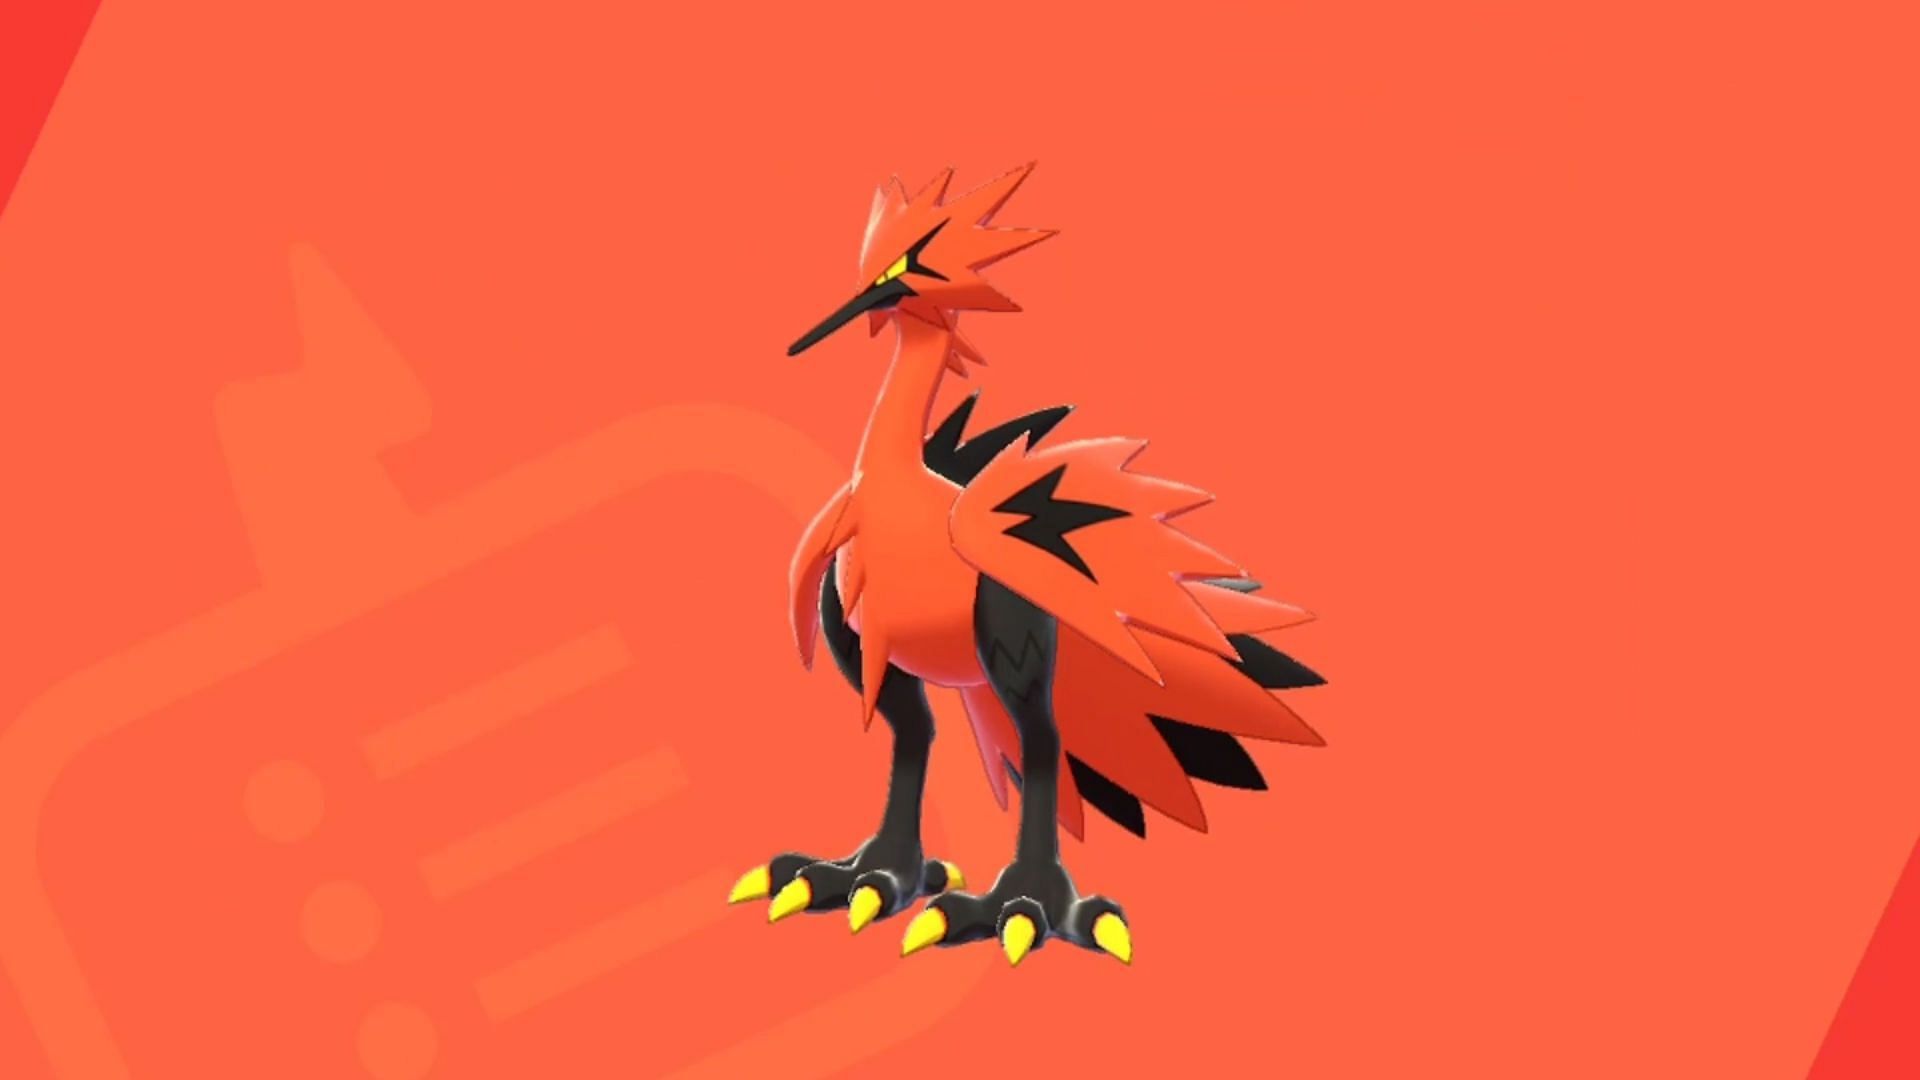 Pokemon GO Shadow Zapdos PvP and PvE guide: Best moveset, counters, and more